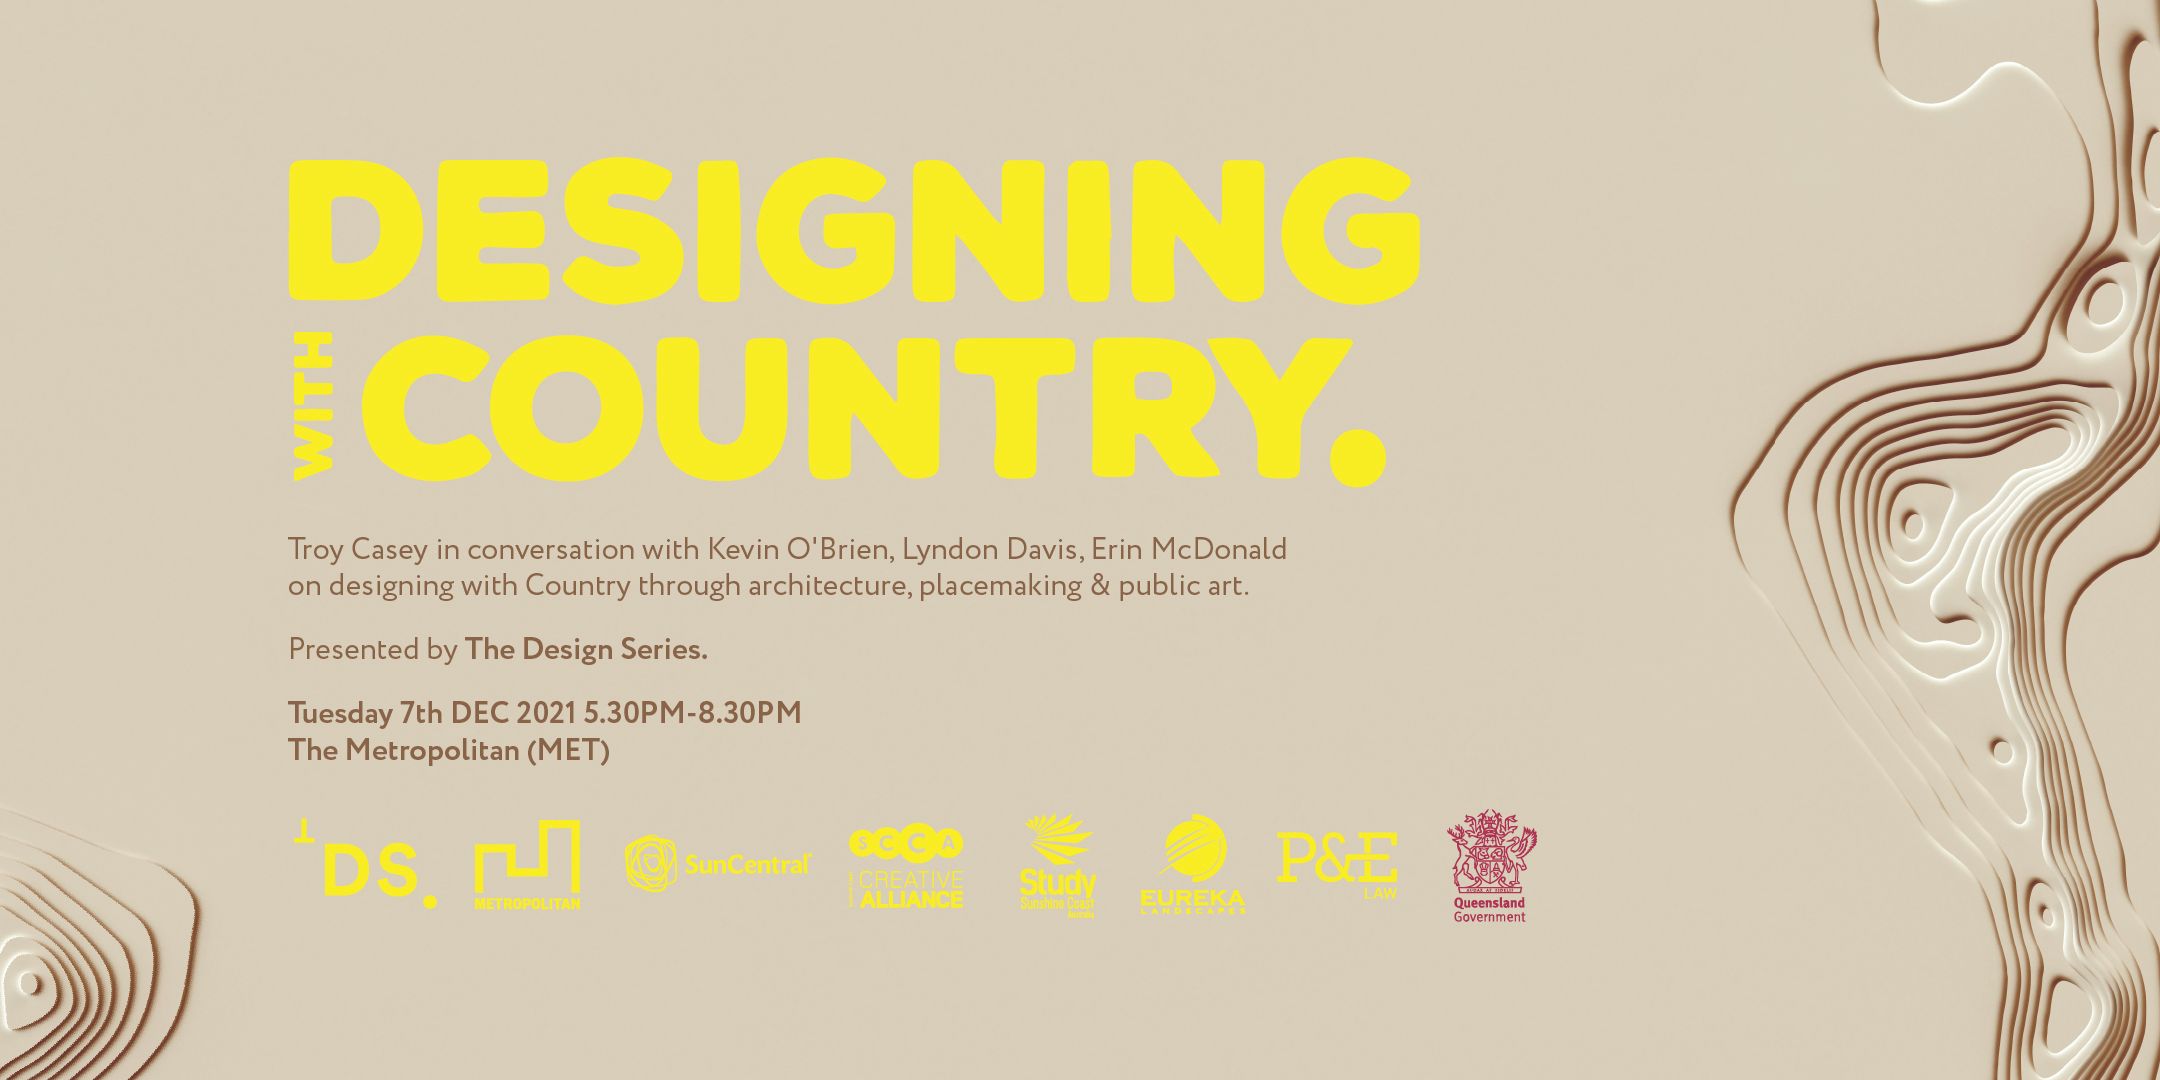 The Design Series | Designing With Country feature image